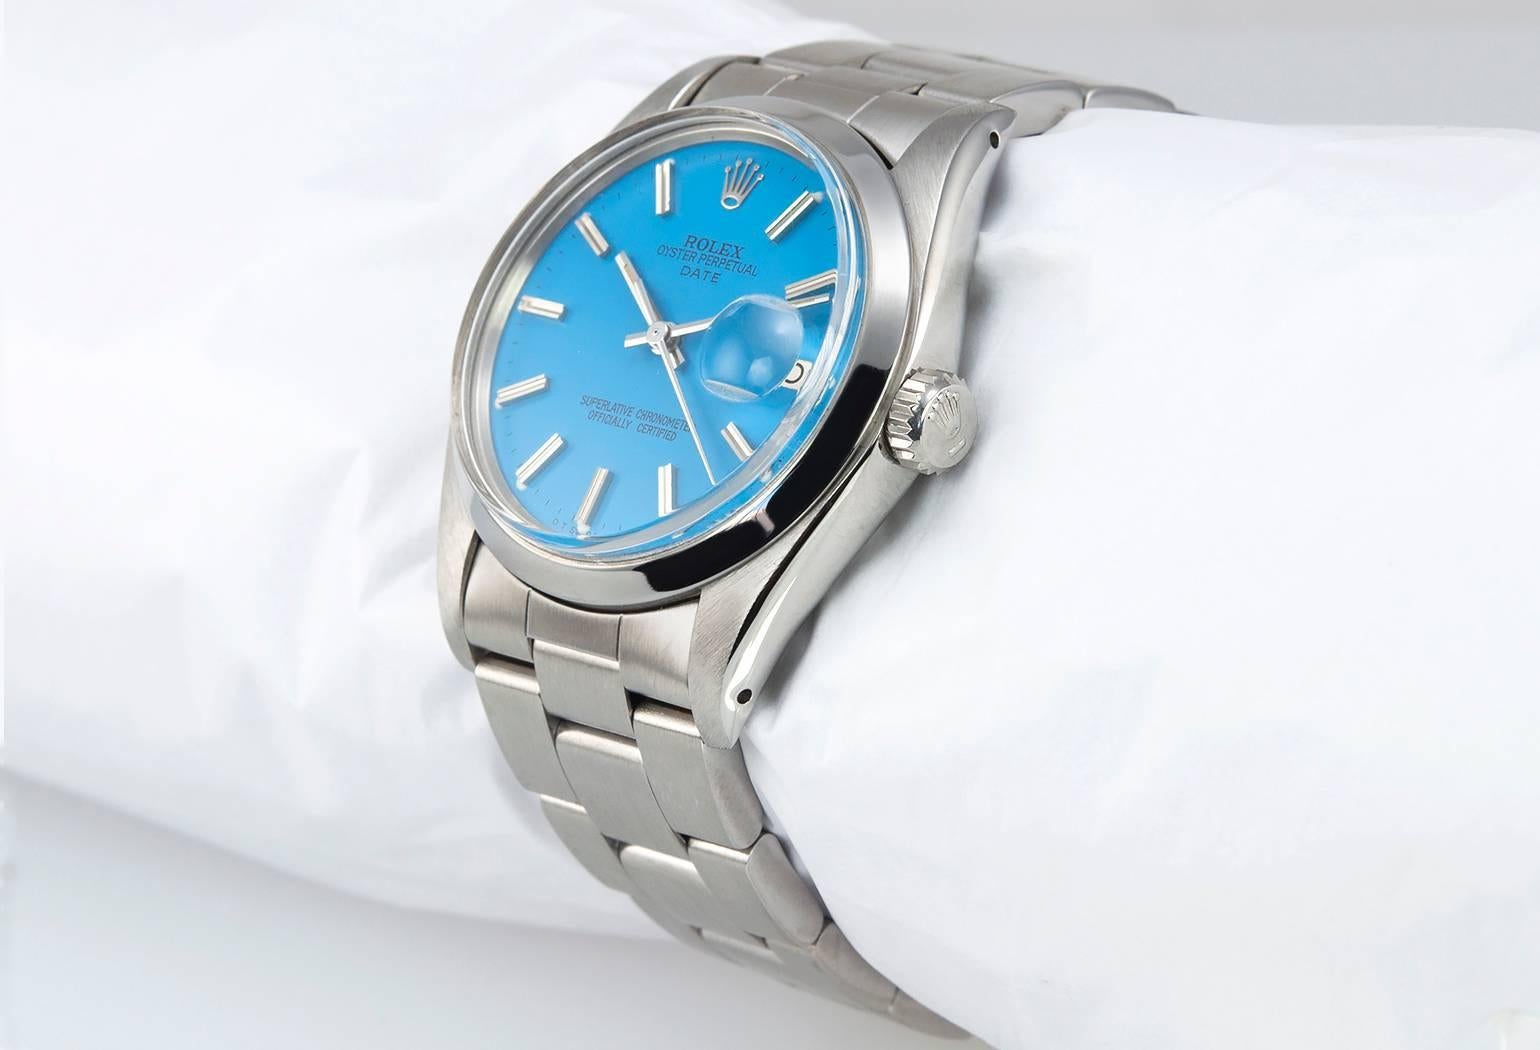 Rolex Oyster Date wristwatch in stainless steel, reference 1500.  This very cool Rolex watch features a custom bright blue stick dial, a smooth stainless steel bezel, a stainless steel folded Oyster bracelet, plastic crystal, stainless steel